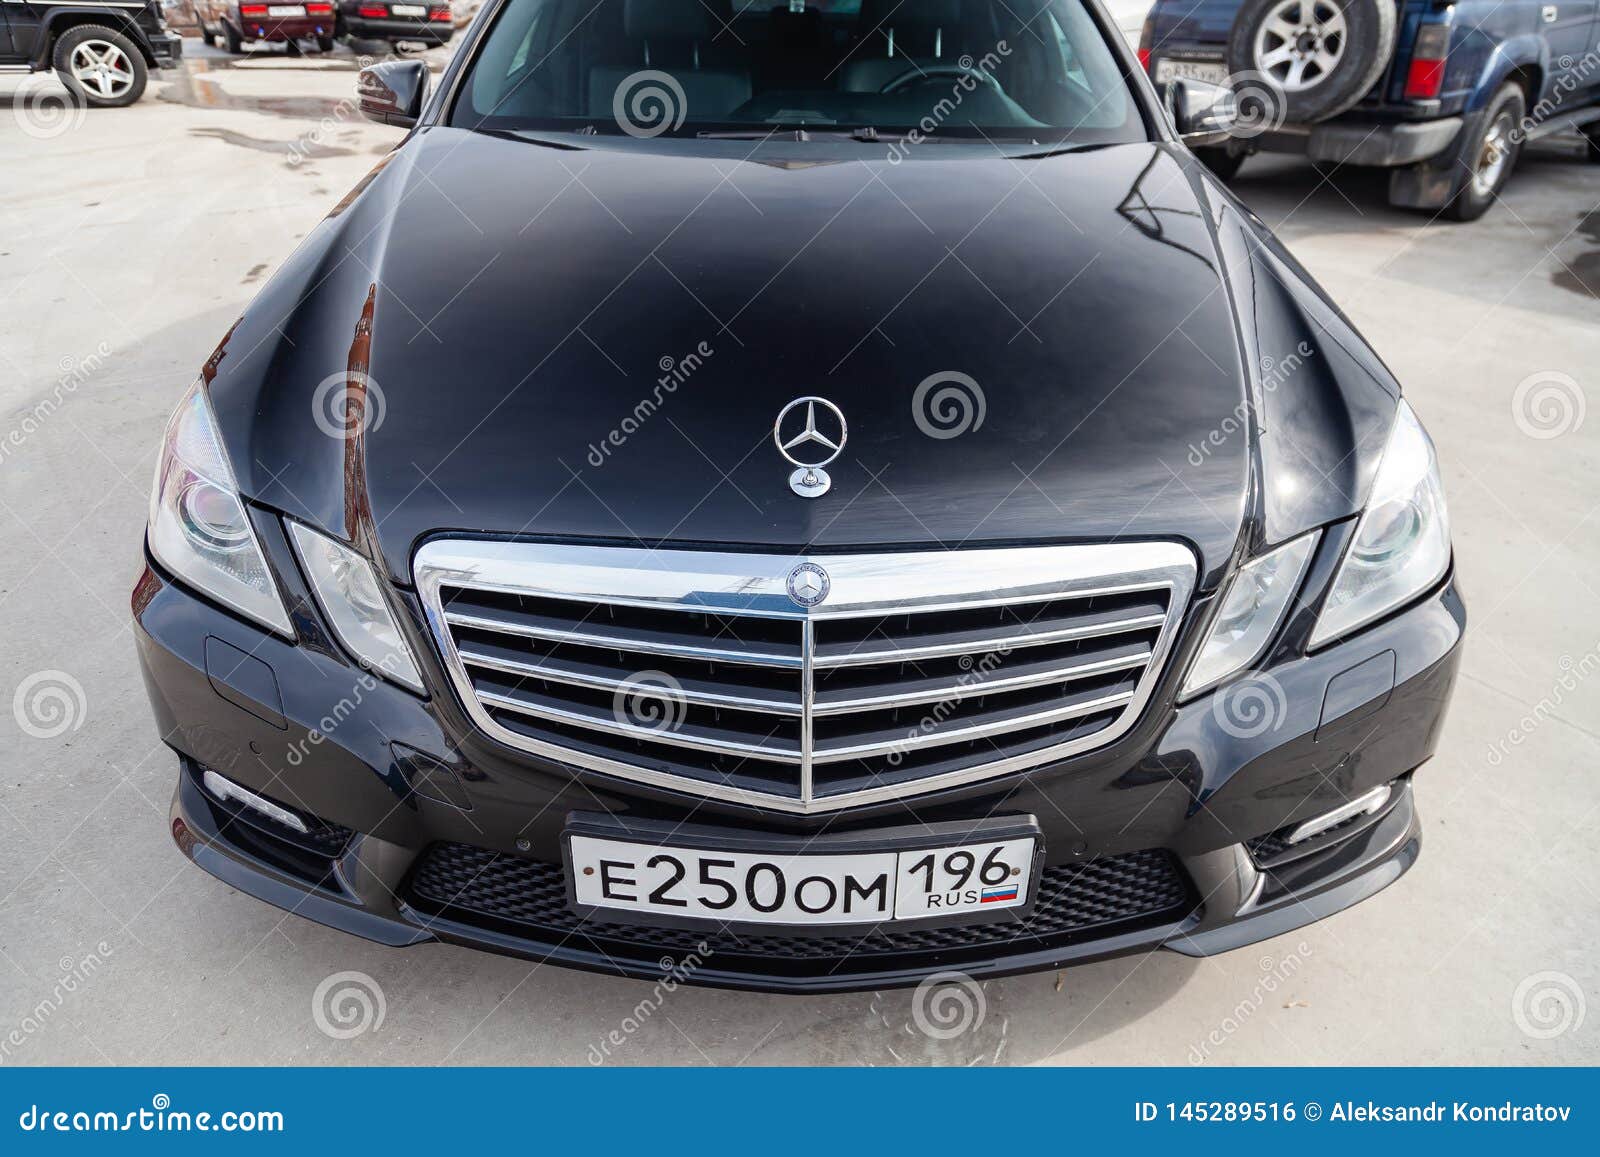 Black Mercedes Benz E Class E250 10 Year Front View With Dark Gray Interior In Excellent Condition In A Parking Space Among Editorial Photo Image Of Fast Elegant